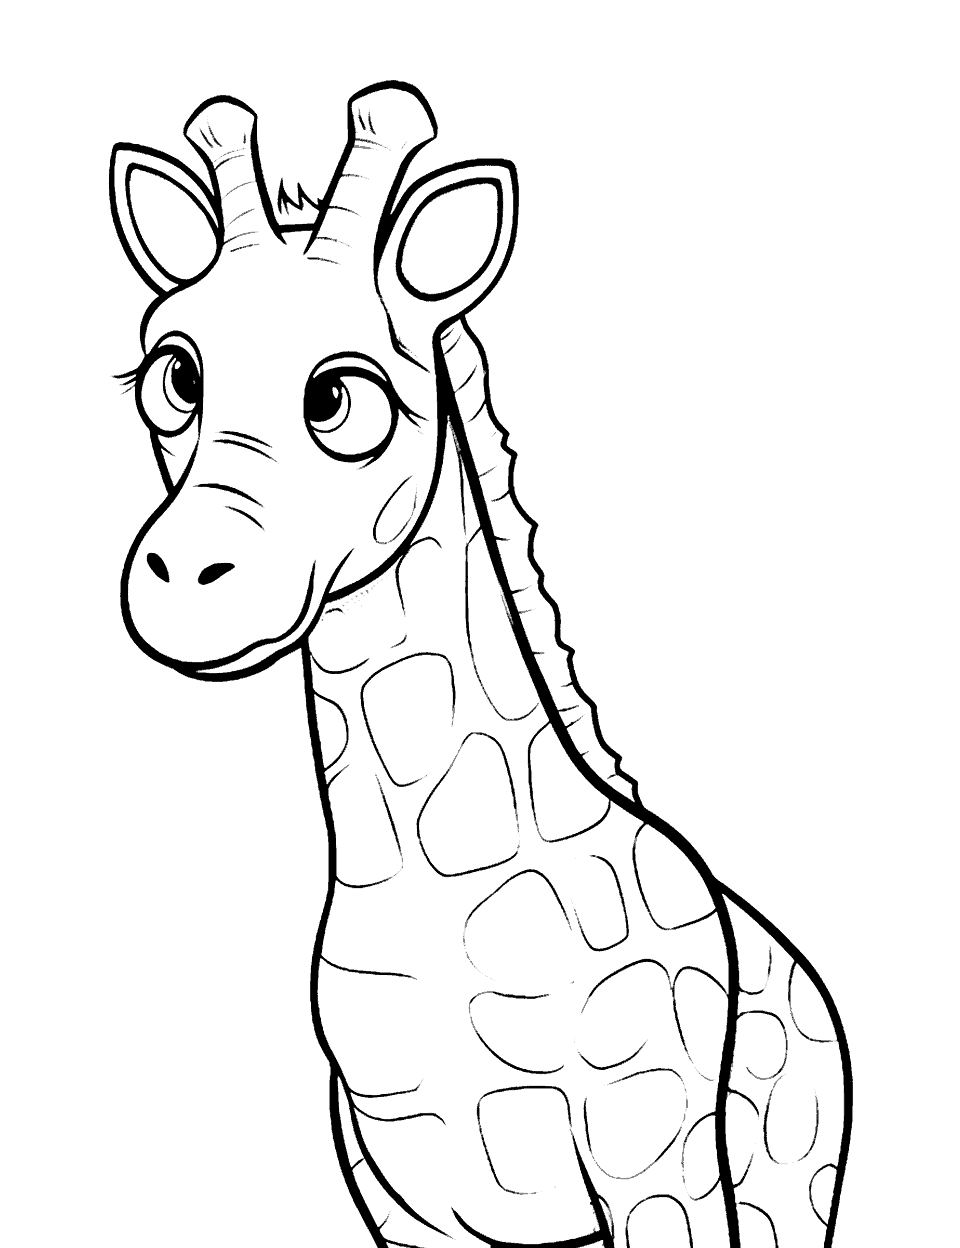 Zoo Visit Coloring Page - A giraffe at the zoo with cute eyes.